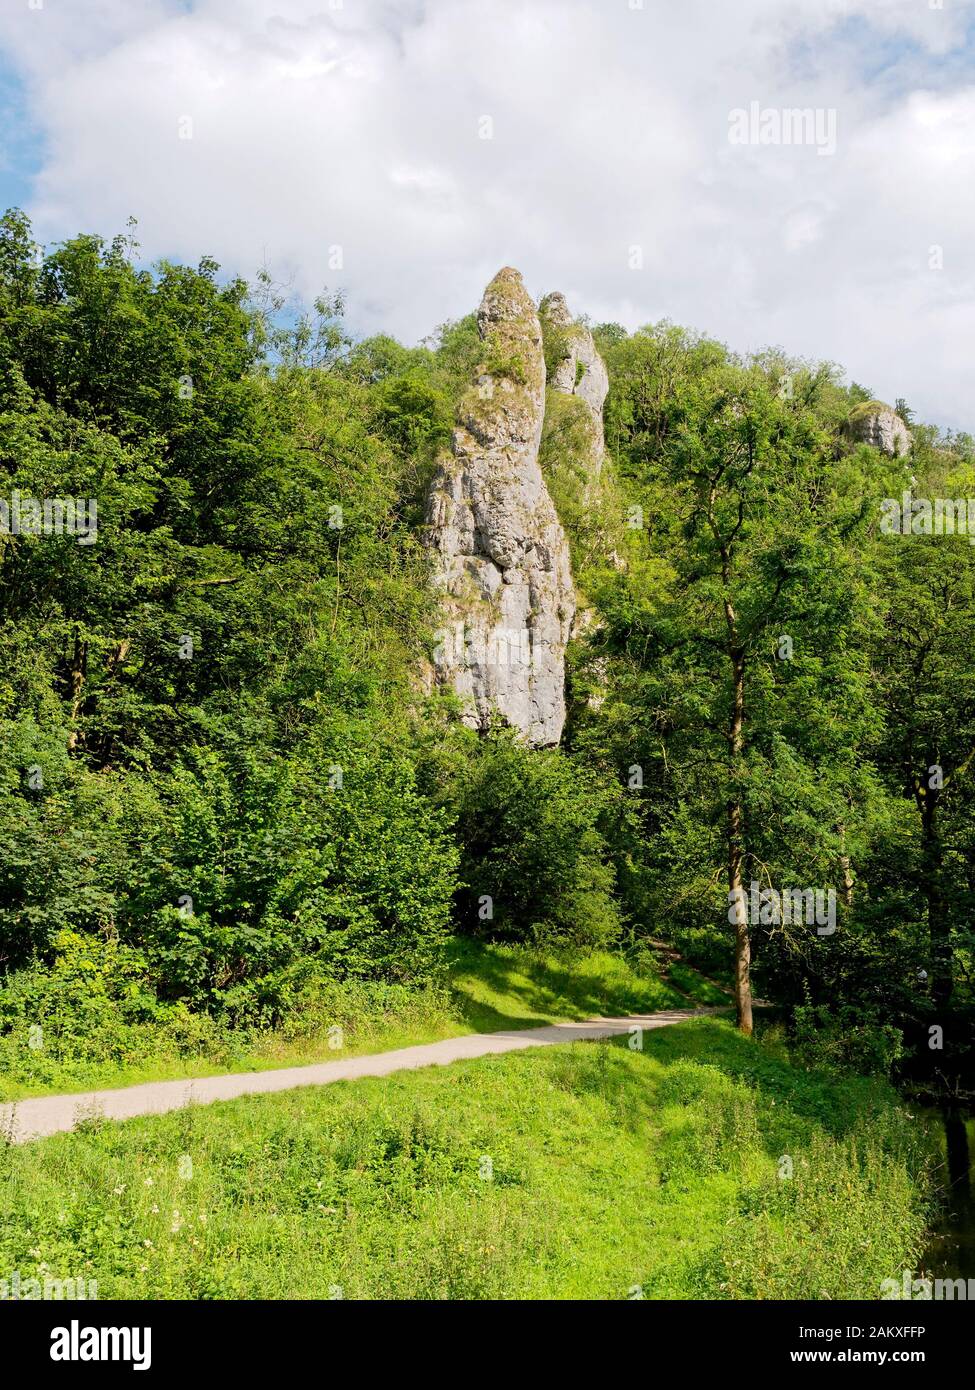 Thew spectacular limestone pinnacles of Pickering Tor in Dovedale, a limestone gorge in the Peak District national Park. Stock Photo